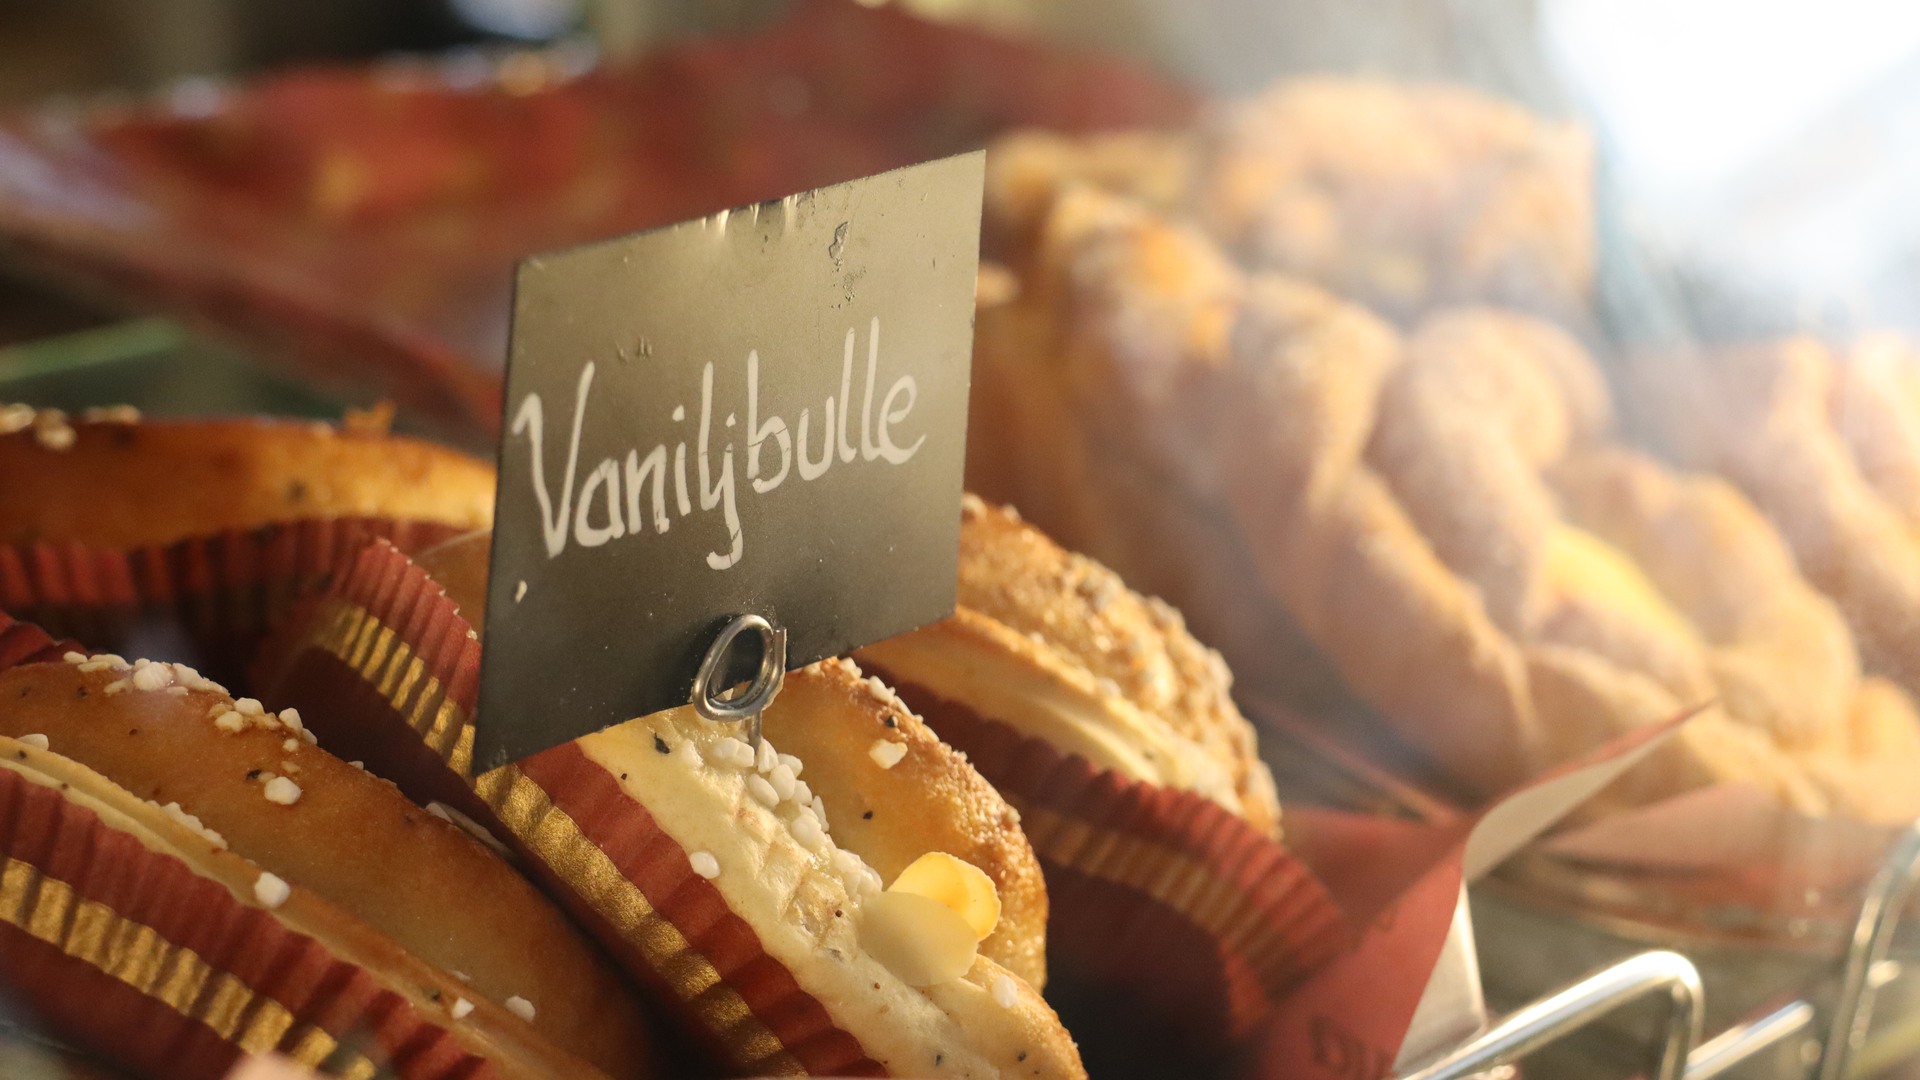 Some buns behind a glass counter and a sign that says Vaniljbulle (vanilla bun)